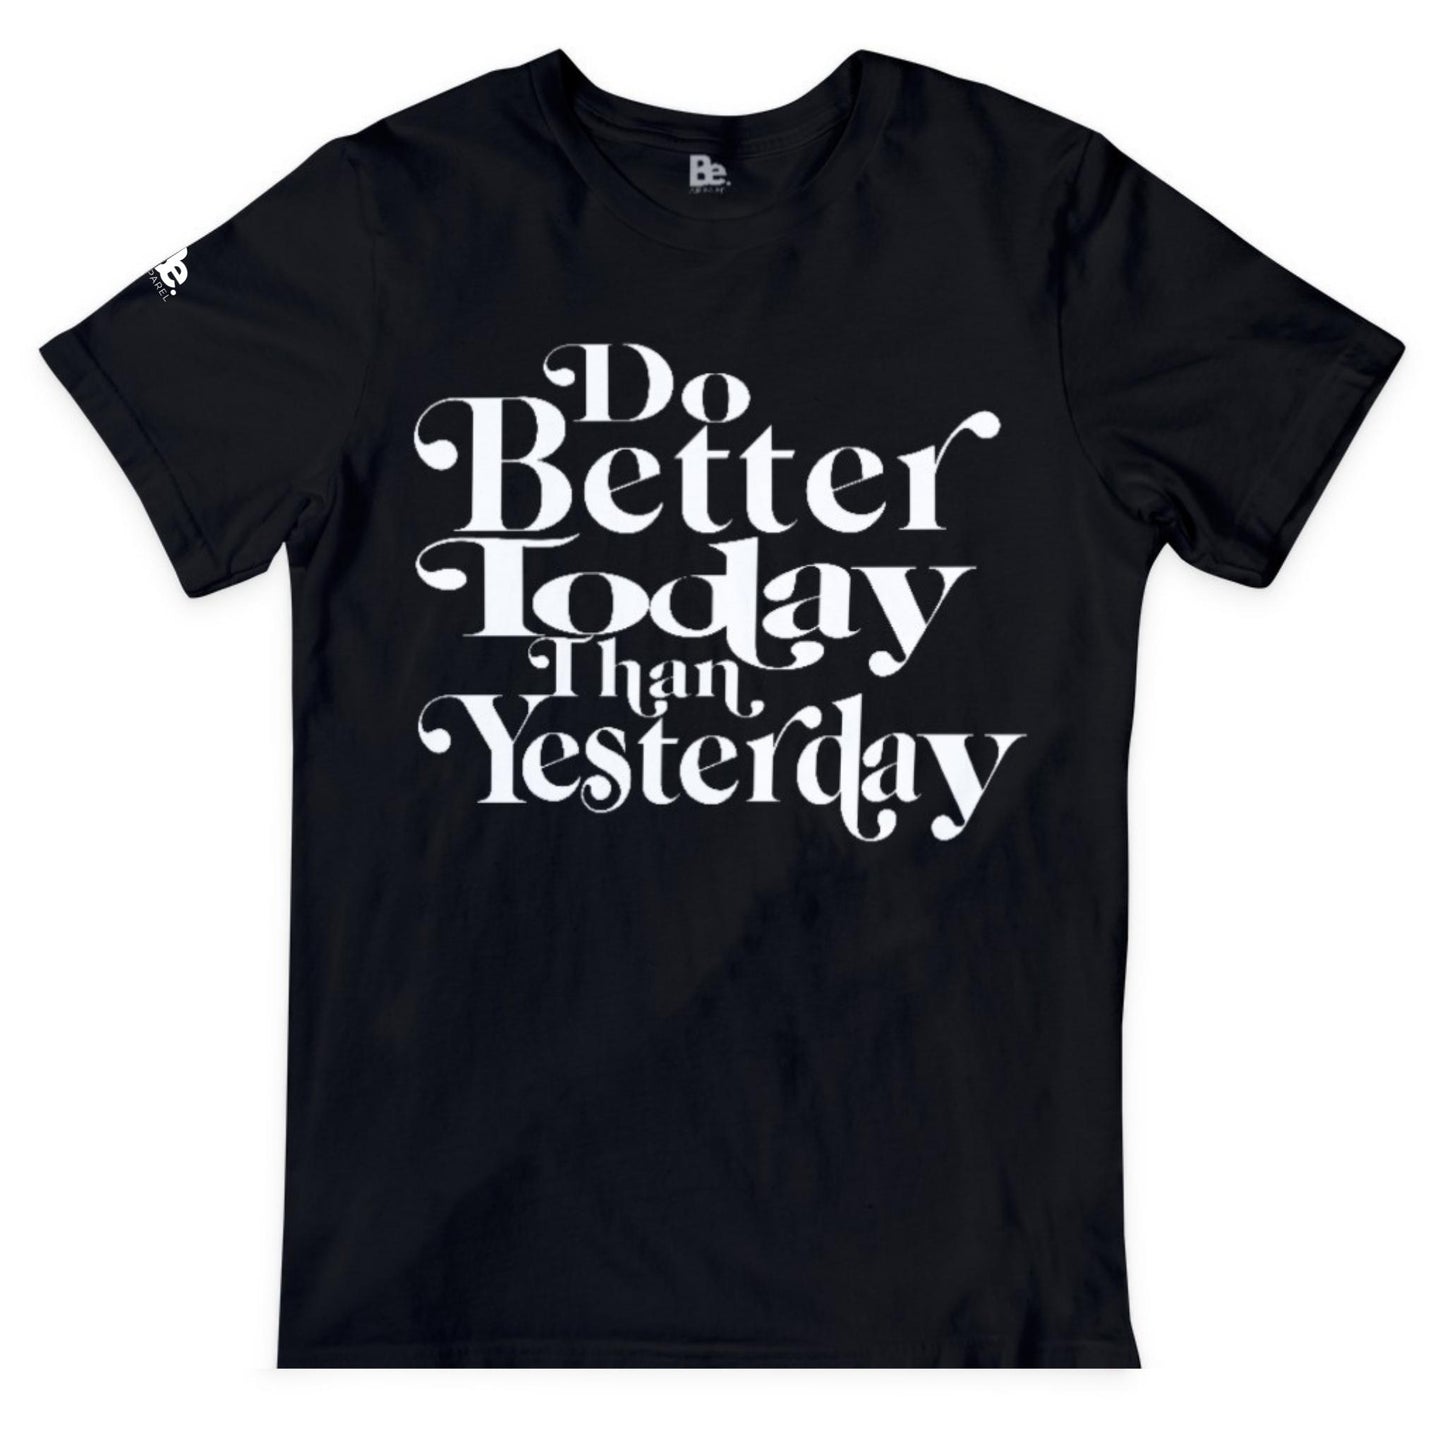 DO BETTER TODAY THAN YESTERDAY - White Out Tee